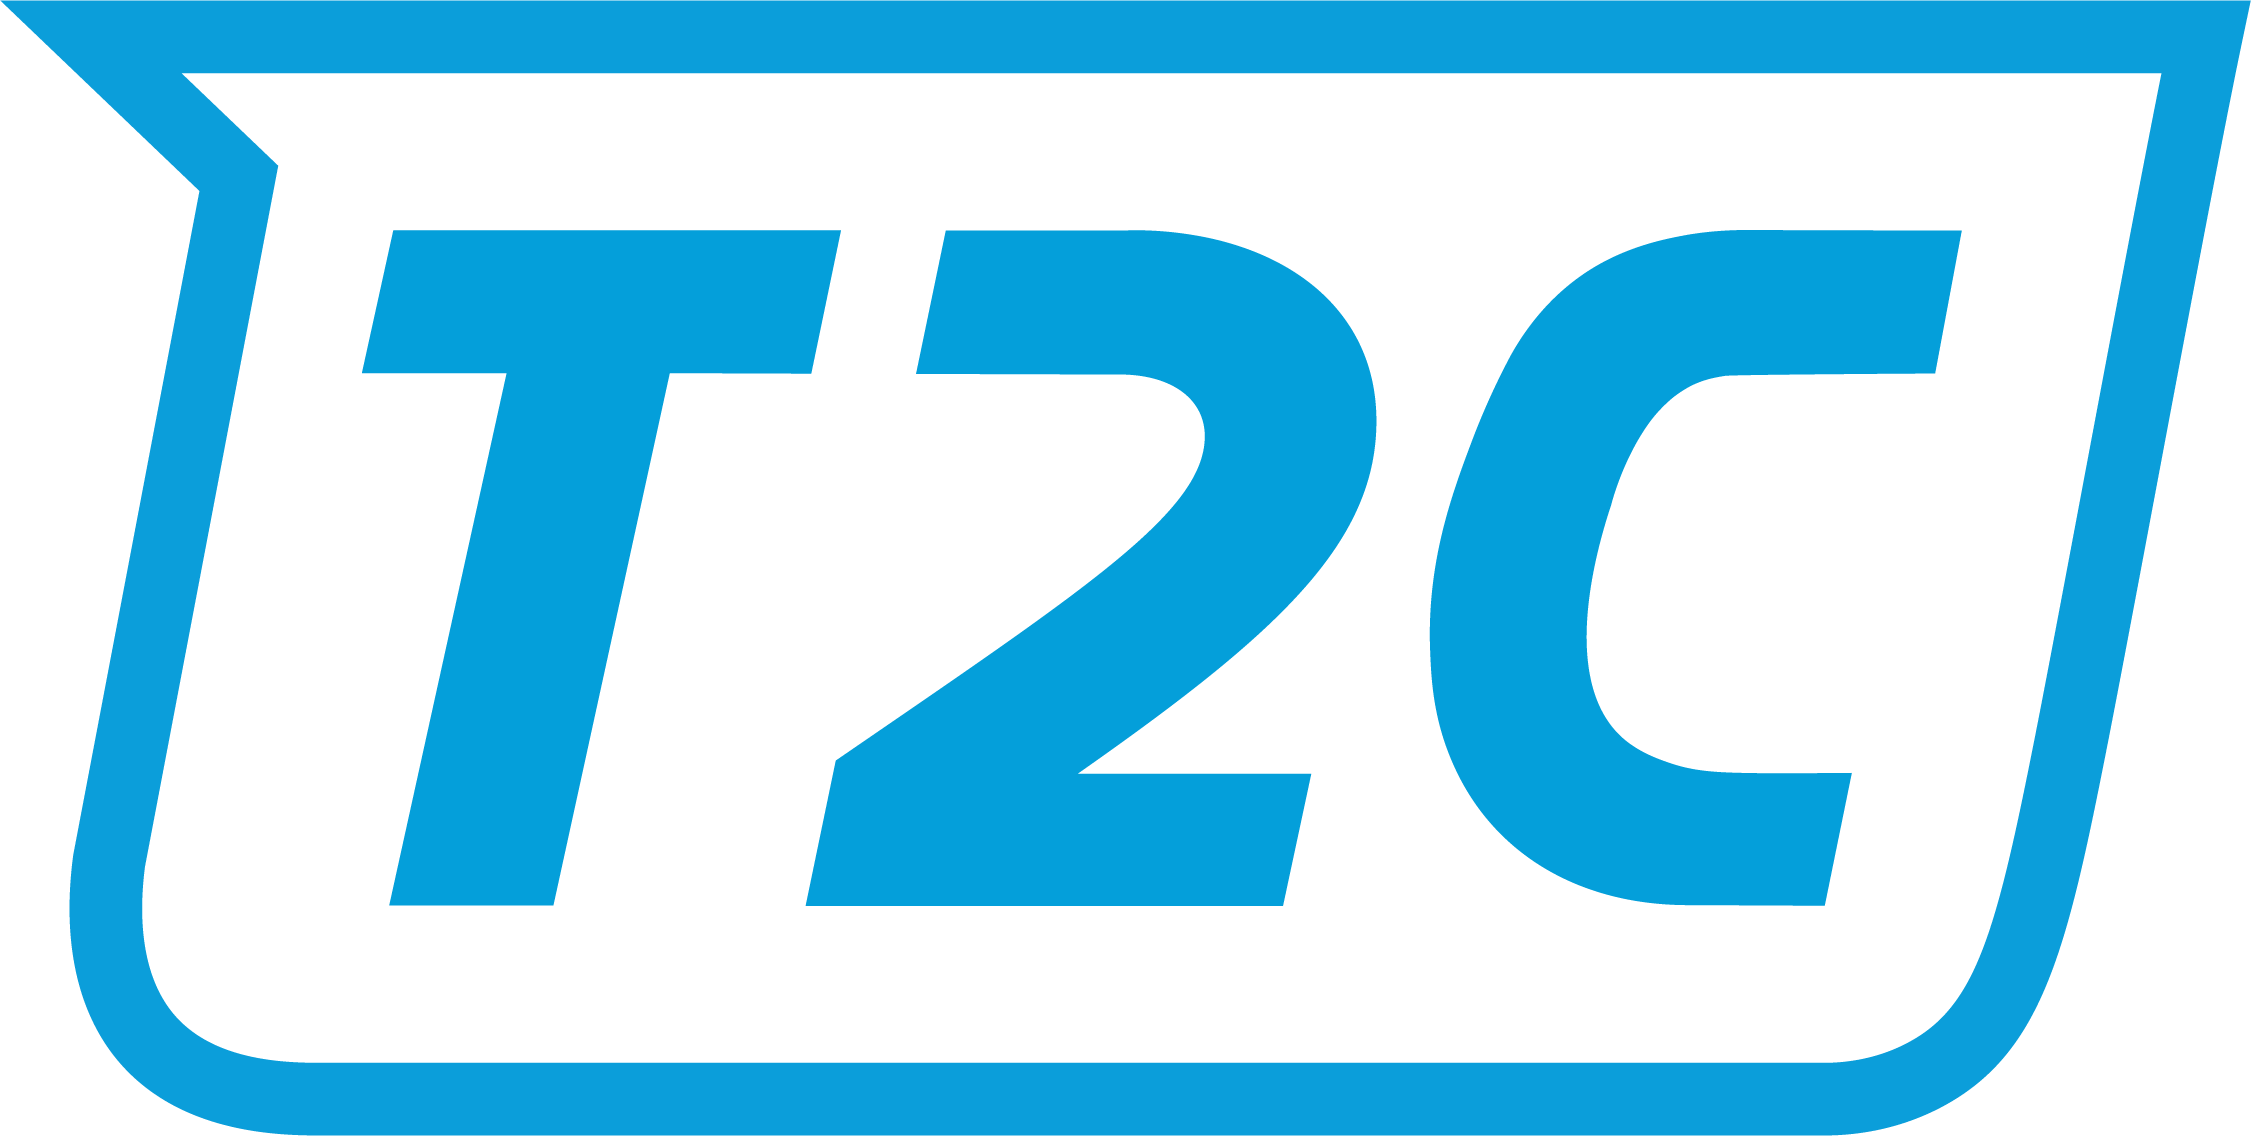 Logo of T2C in blue text surrounded by a blue speech bubble against a white background.